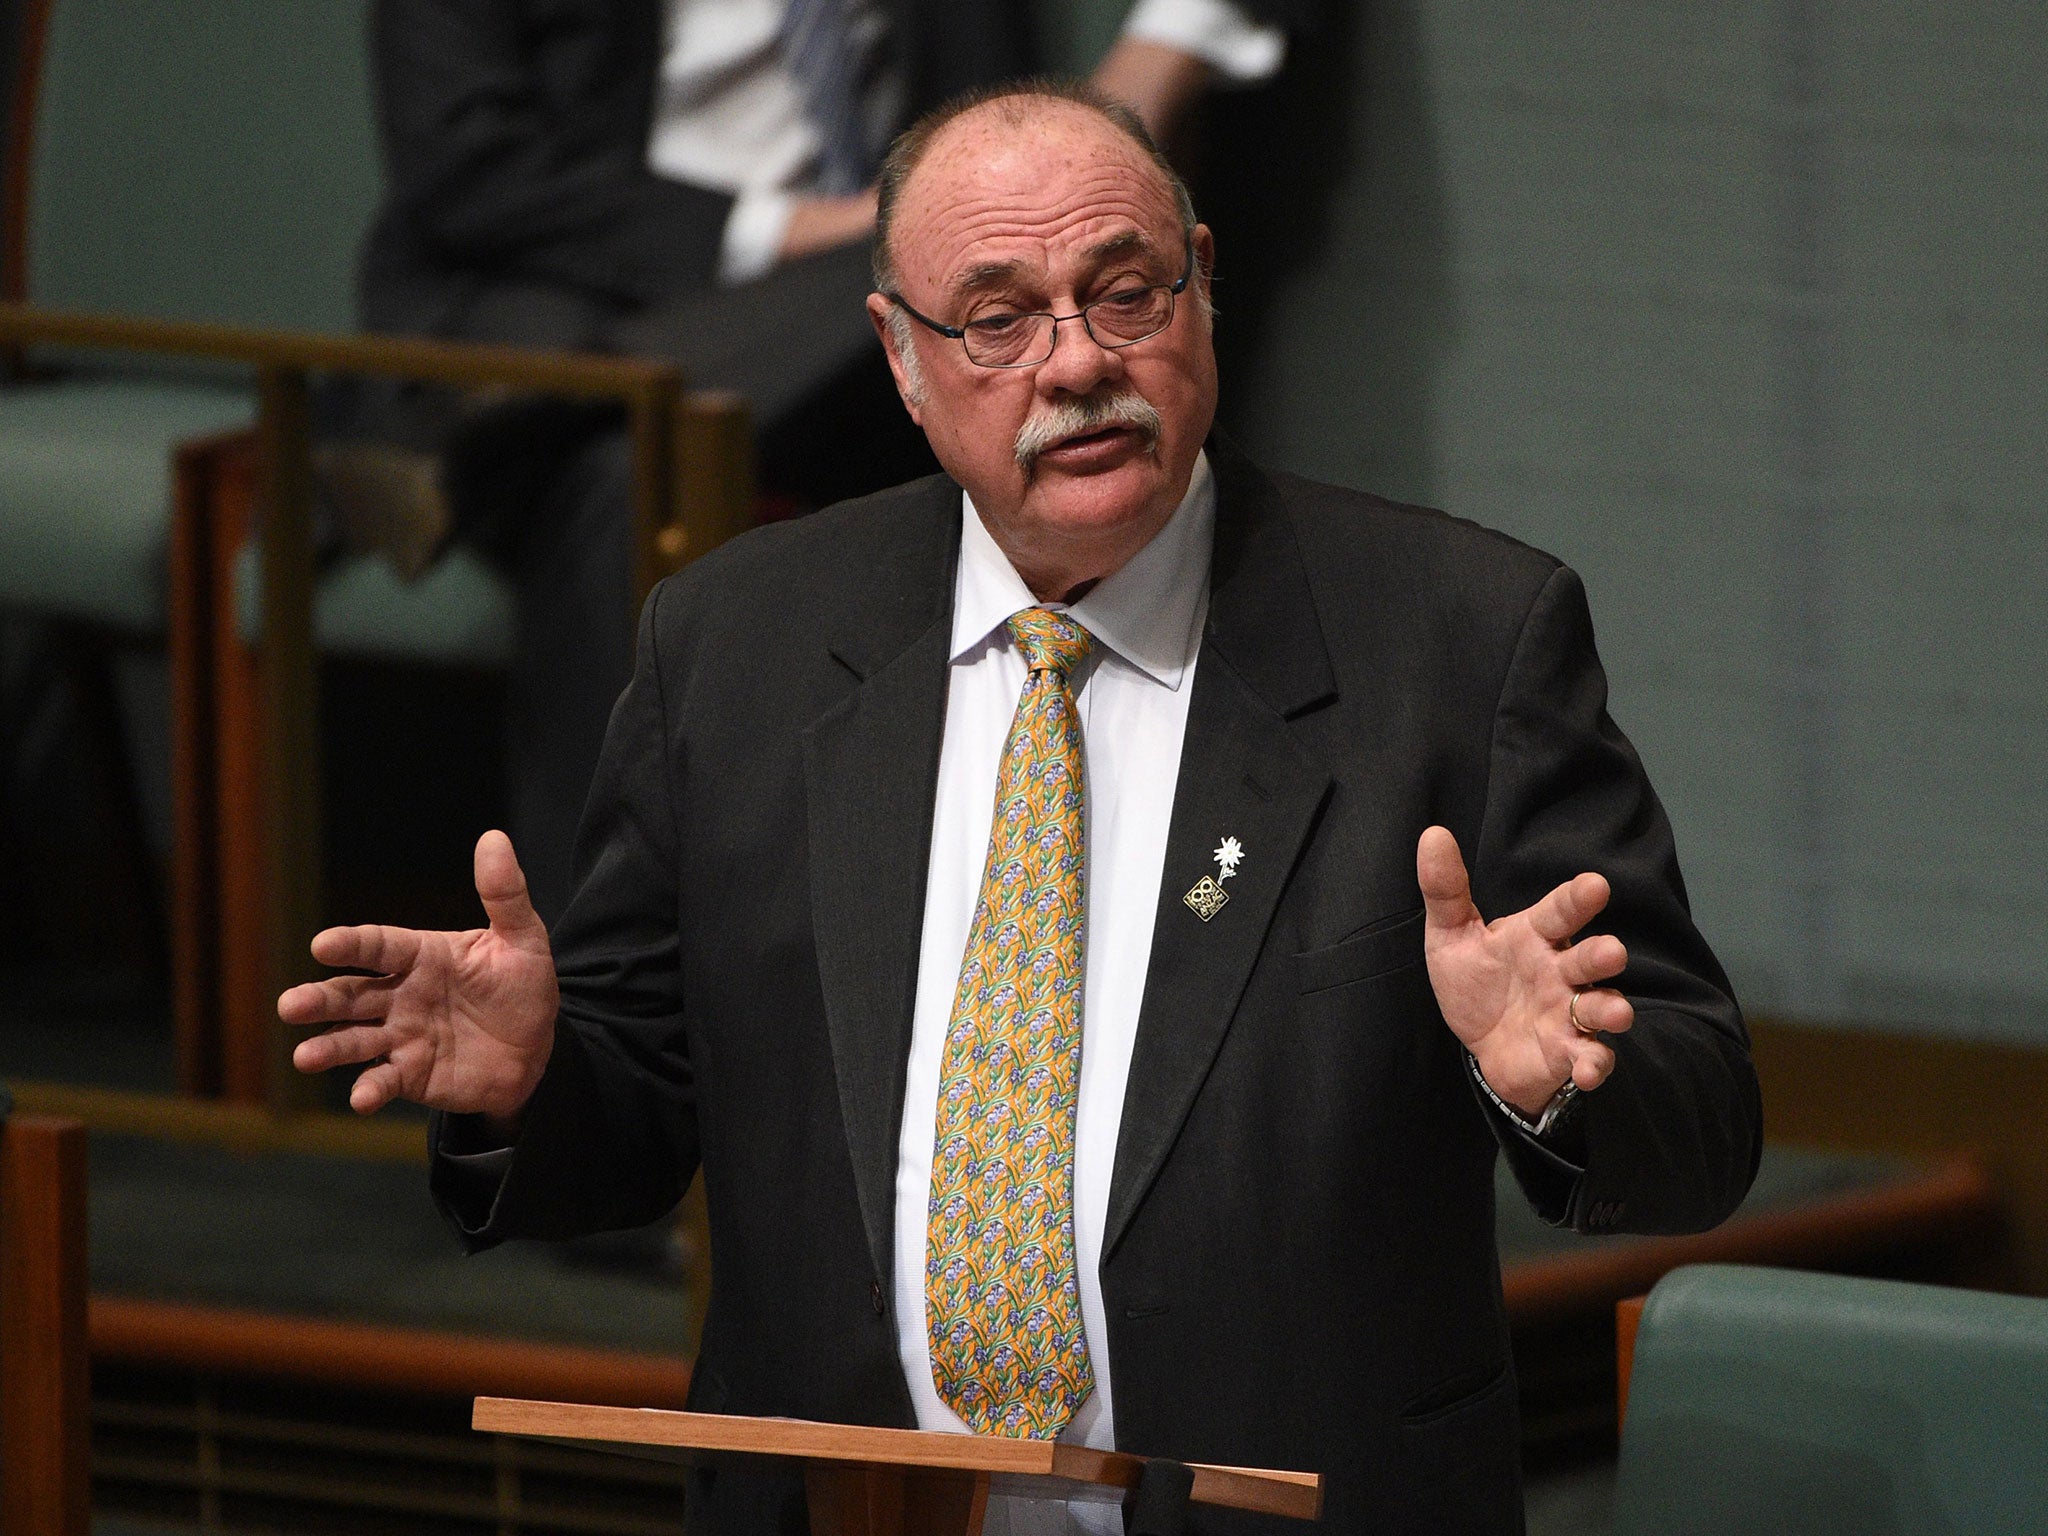 Liberal National member of the Australian House of Representatives for Leichhardt, Warren Entsch, as he introduces the same-sex marriage bill in the House of Representatives